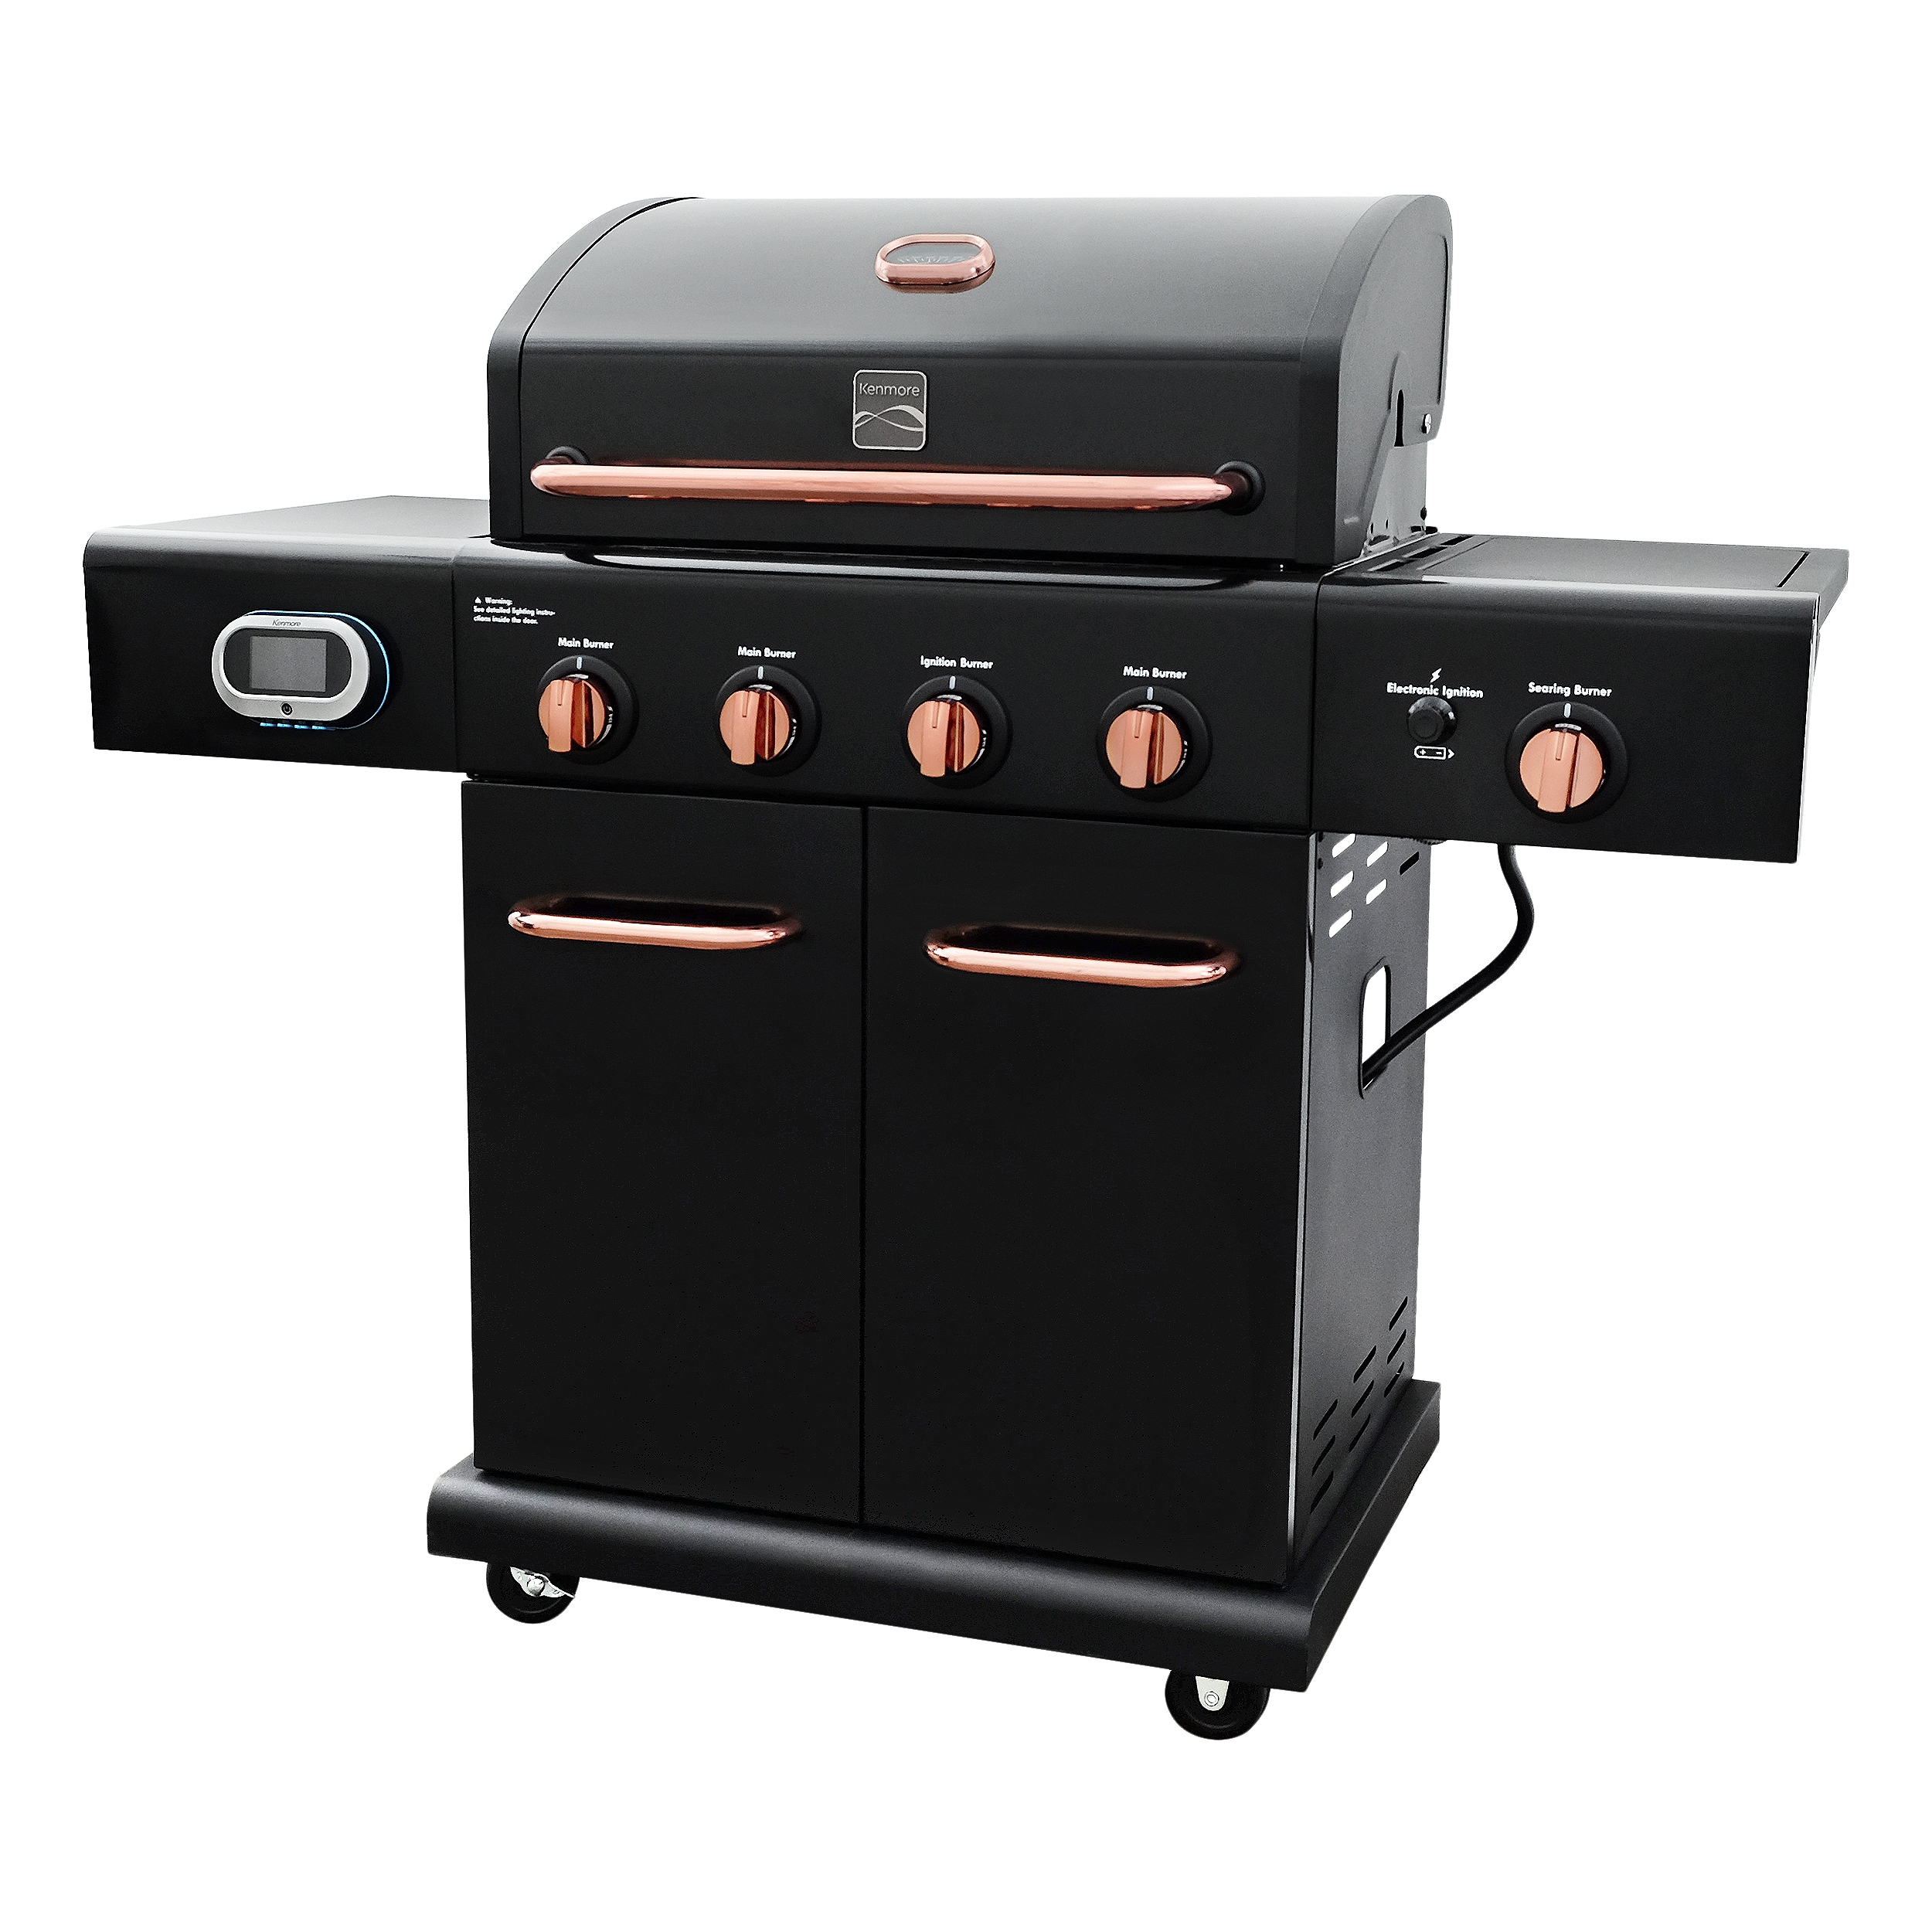 Kenmore Smart Grill with Side Searing Burner Black with Copper Accent 4-Burner Liquid Propane Gas Grill the Gas Grills department at